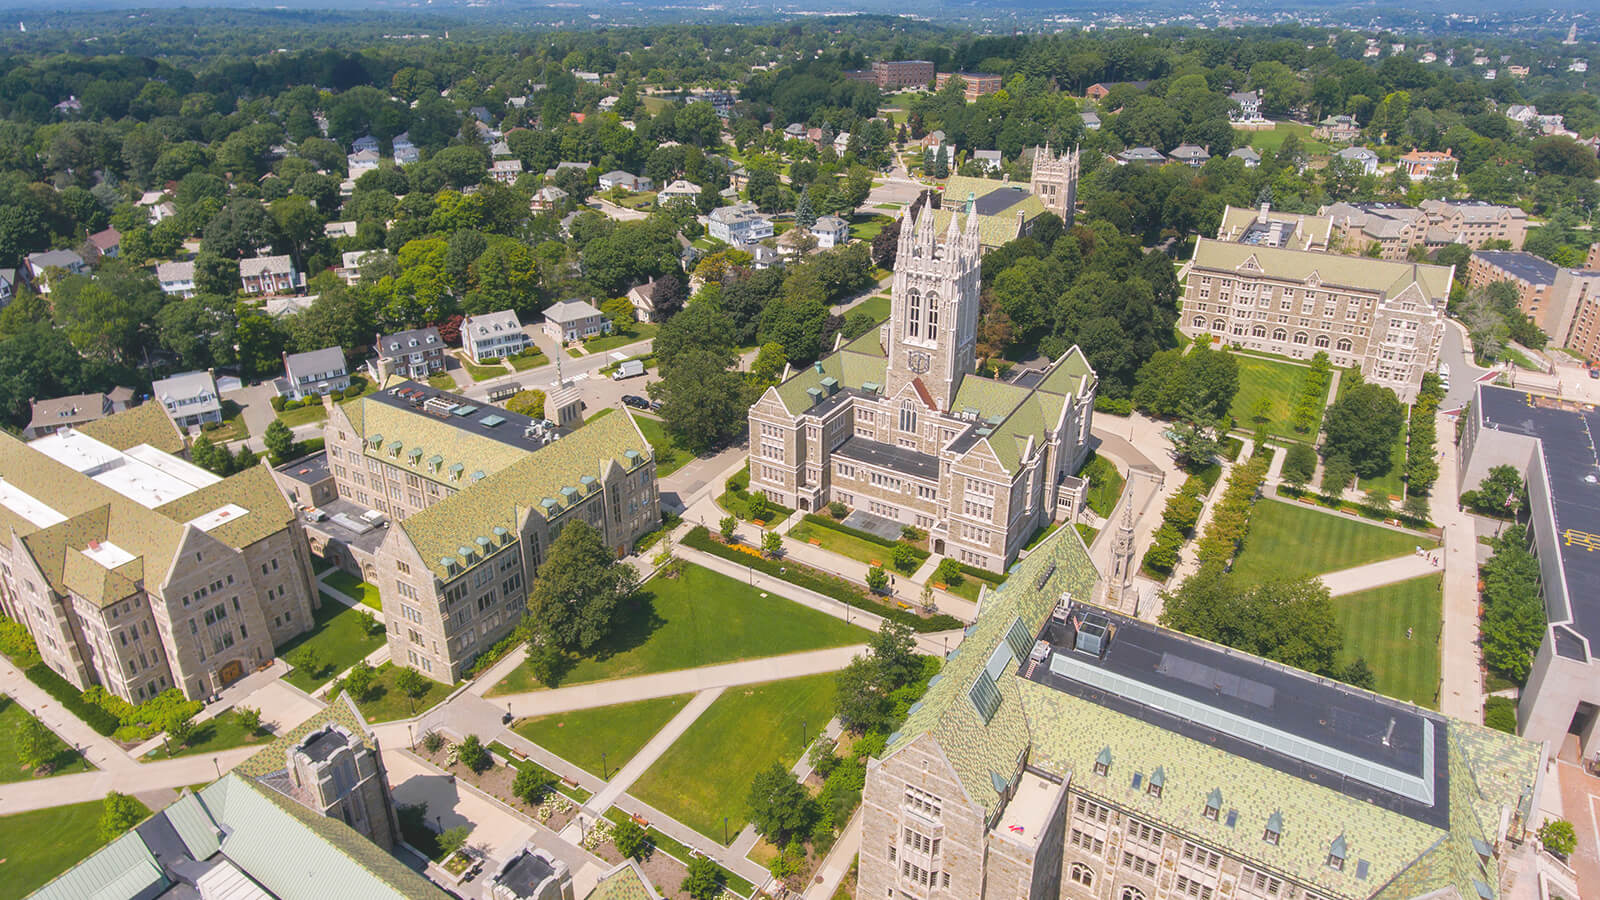 An aerial view of Boston College's sprawling campus. It shows green lawns and multiple college buildings. 